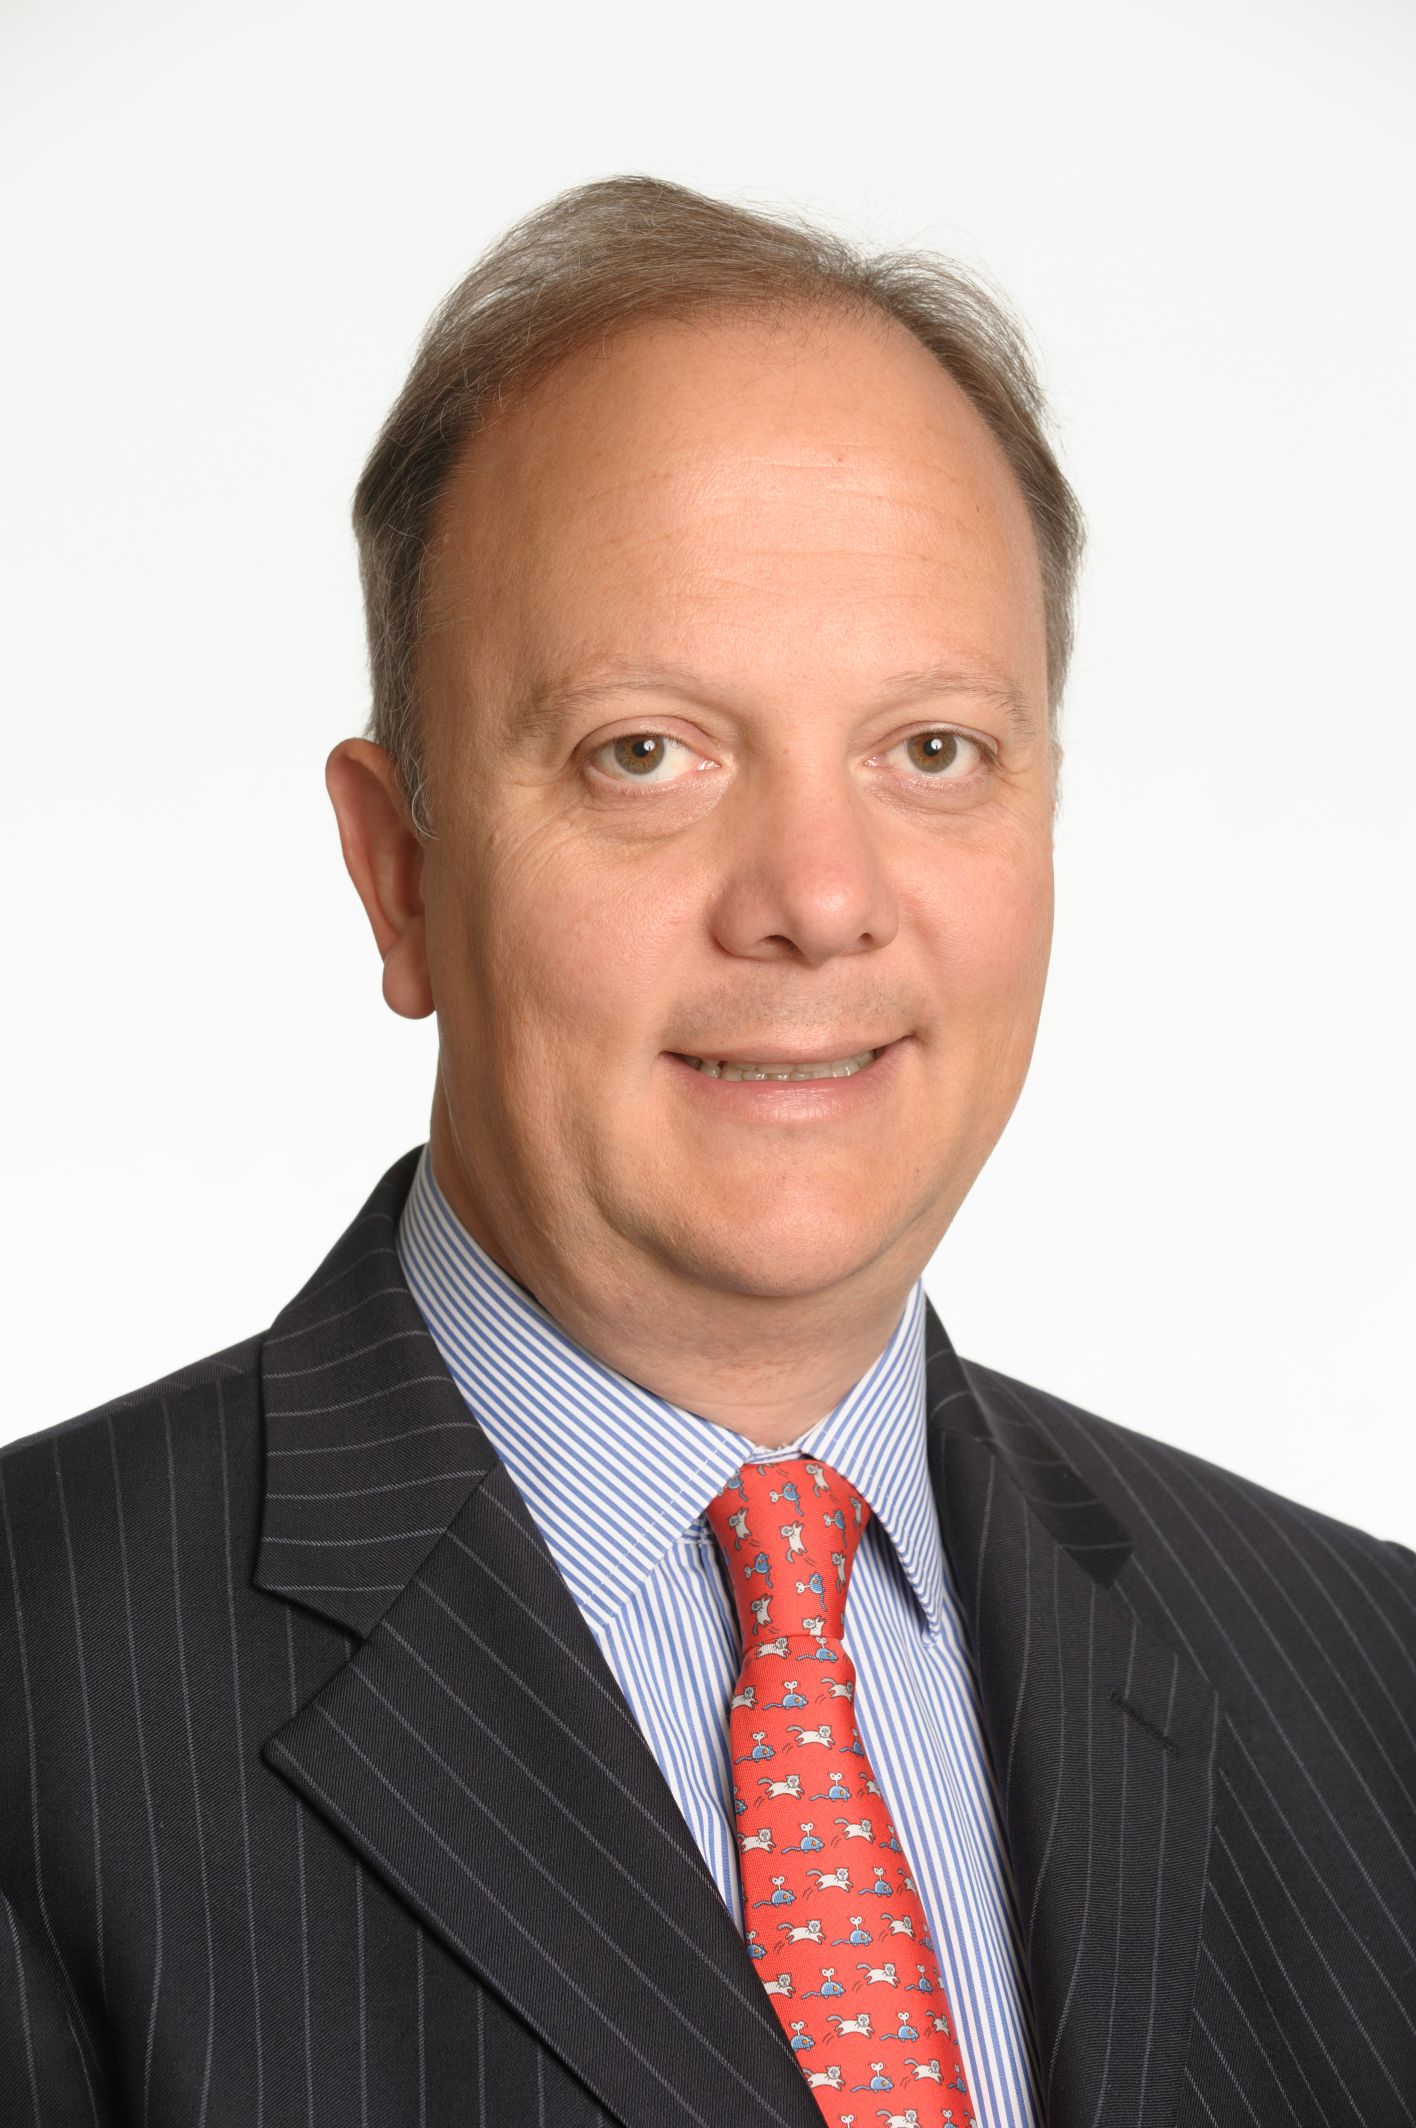 Dominic Broom is global head of trade business development at BNY Mellon